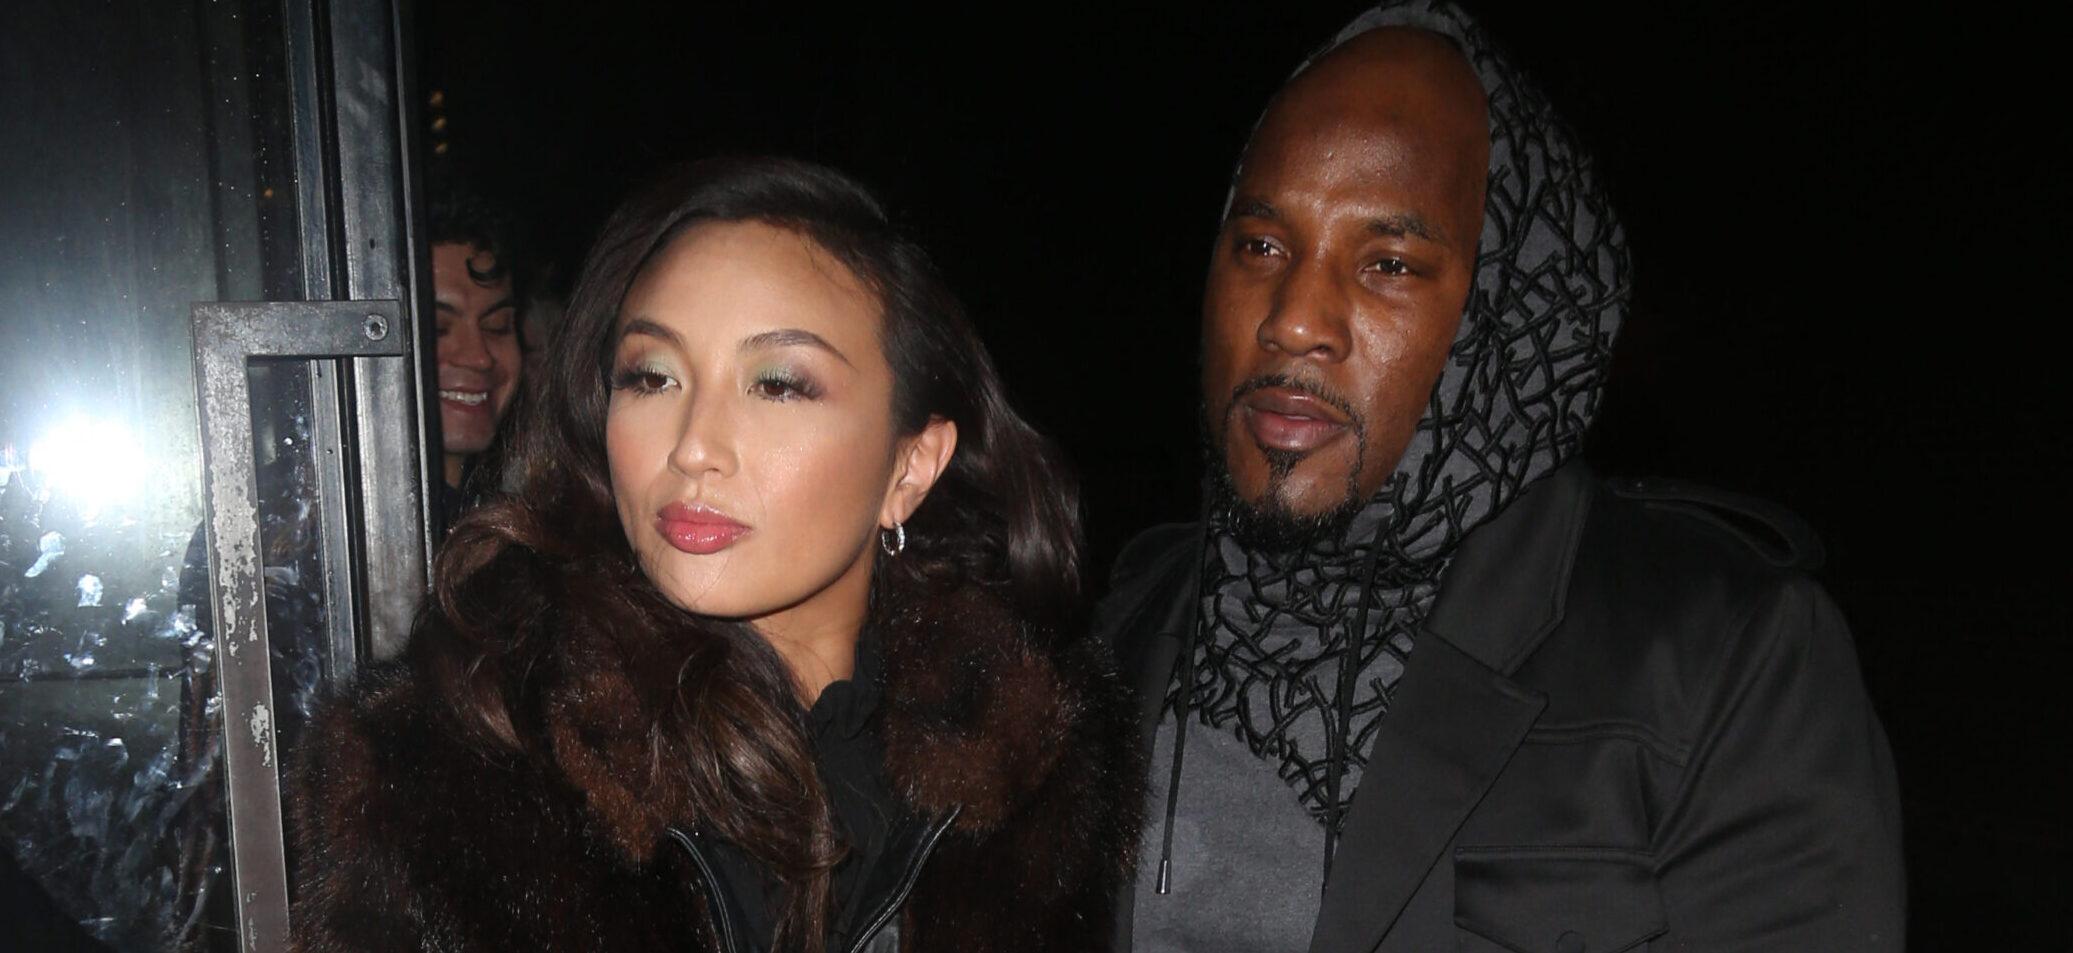 Jeezy Claims Jeannie Mai Wants To ‘Destroy’ His ‘Name And Reputation’ Amid Nasty Divorce Battle